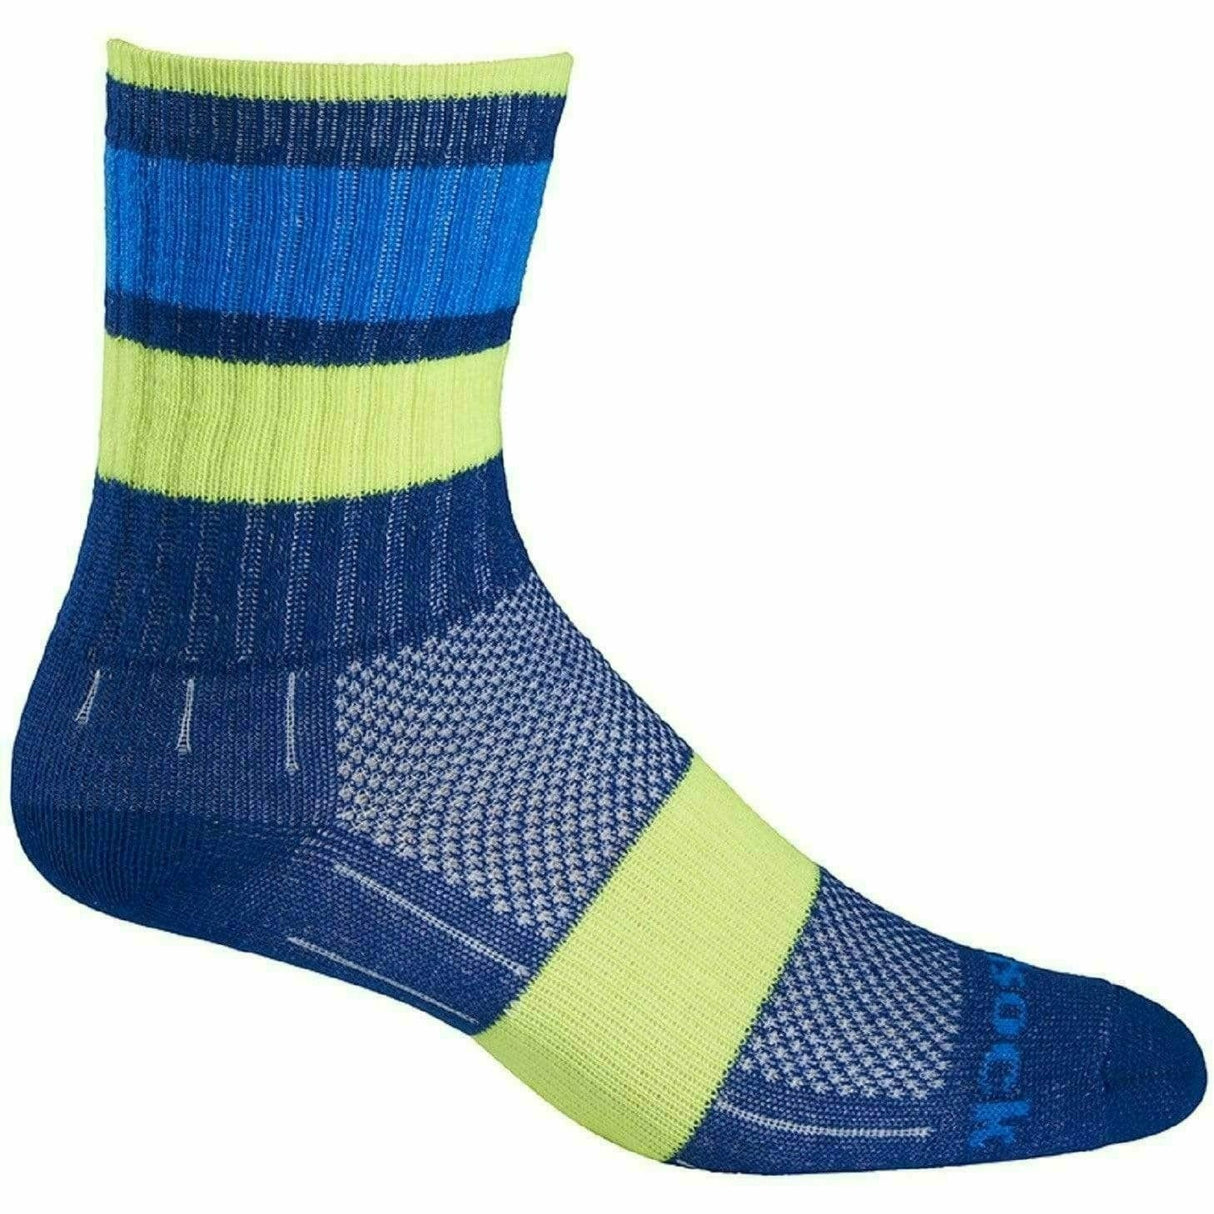 Wrightsock Kids Double-Layer Escape Midweight Crew Socks  -  Small / Blue Stripe